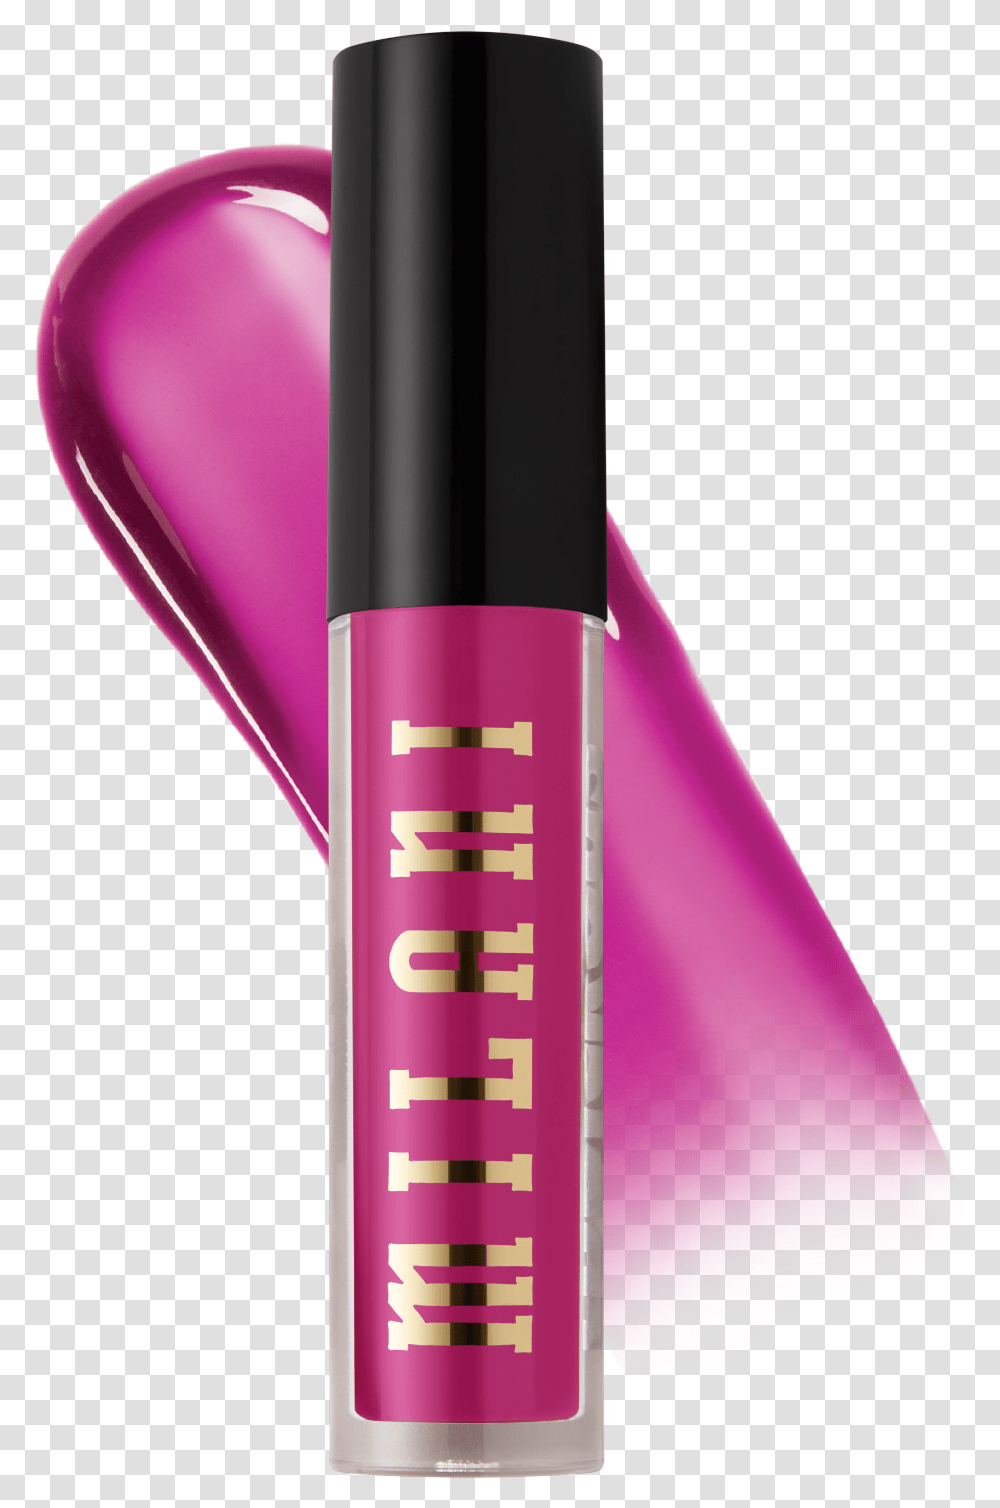 Milani Ludicrous Lip Gloss In Power Suit On White Background Perfume, Cosmetics, Bottle, Lipstick, Purple Transparent Png